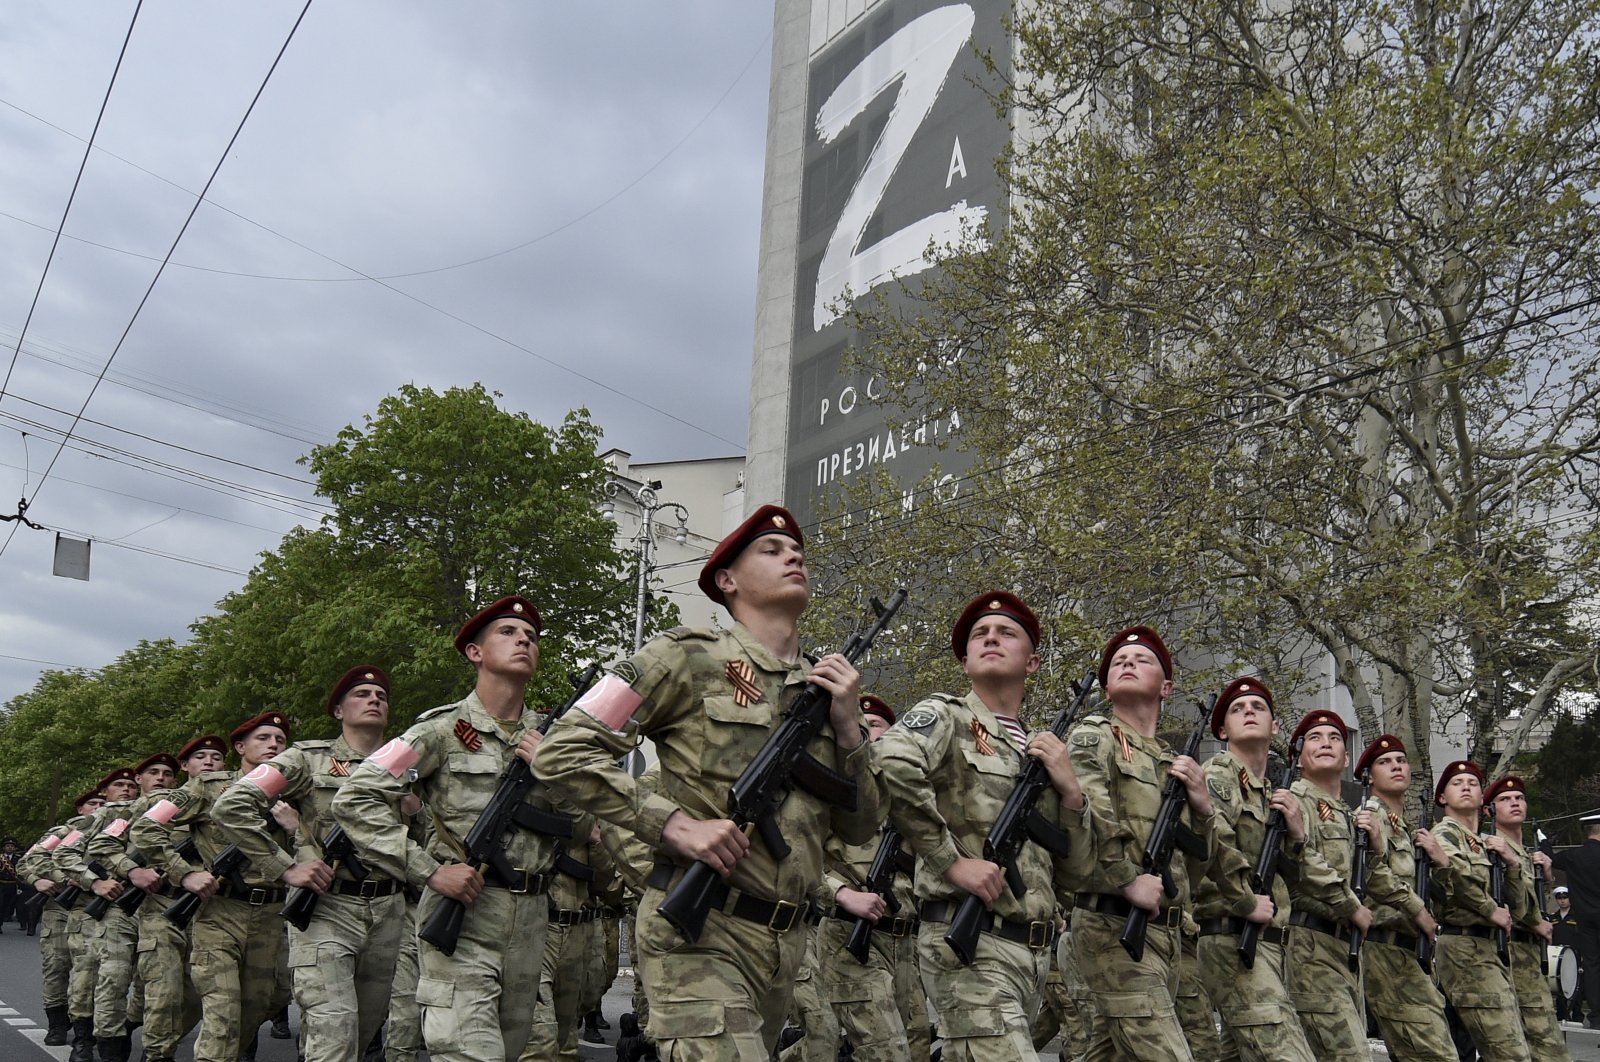 Russian National Guard (Rosguardia) forces march through a street with a letter Z, which has become a symbol of the Russian military on a building in Sevastopol, Crimea, Thursday, May 5, 2022.  (AP Photo)